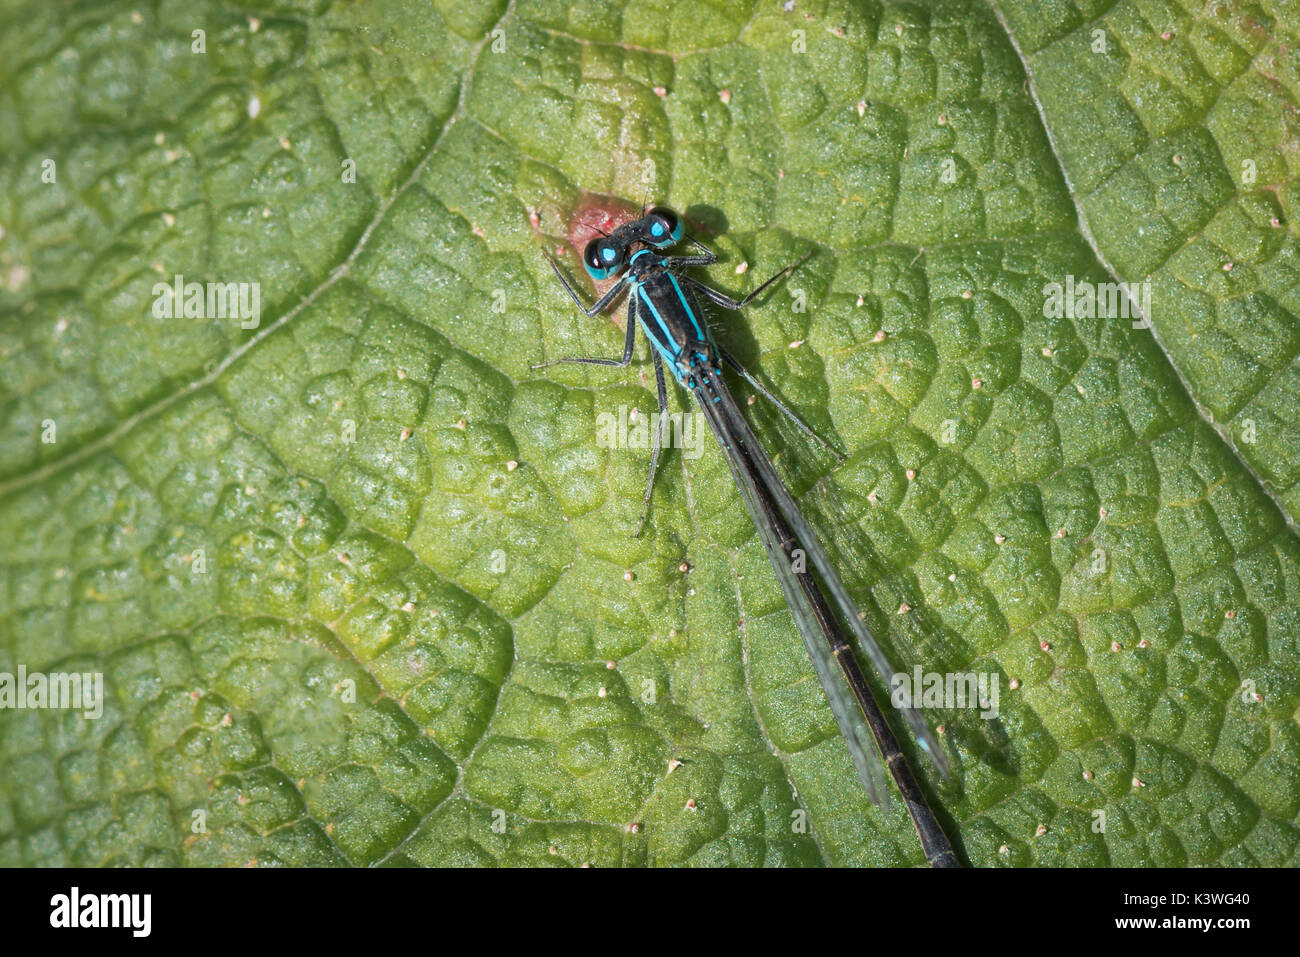 Blue Dragonfly on Giant Rhubarb Leaf texture pattern at Kew Gardens in London Stock Photo